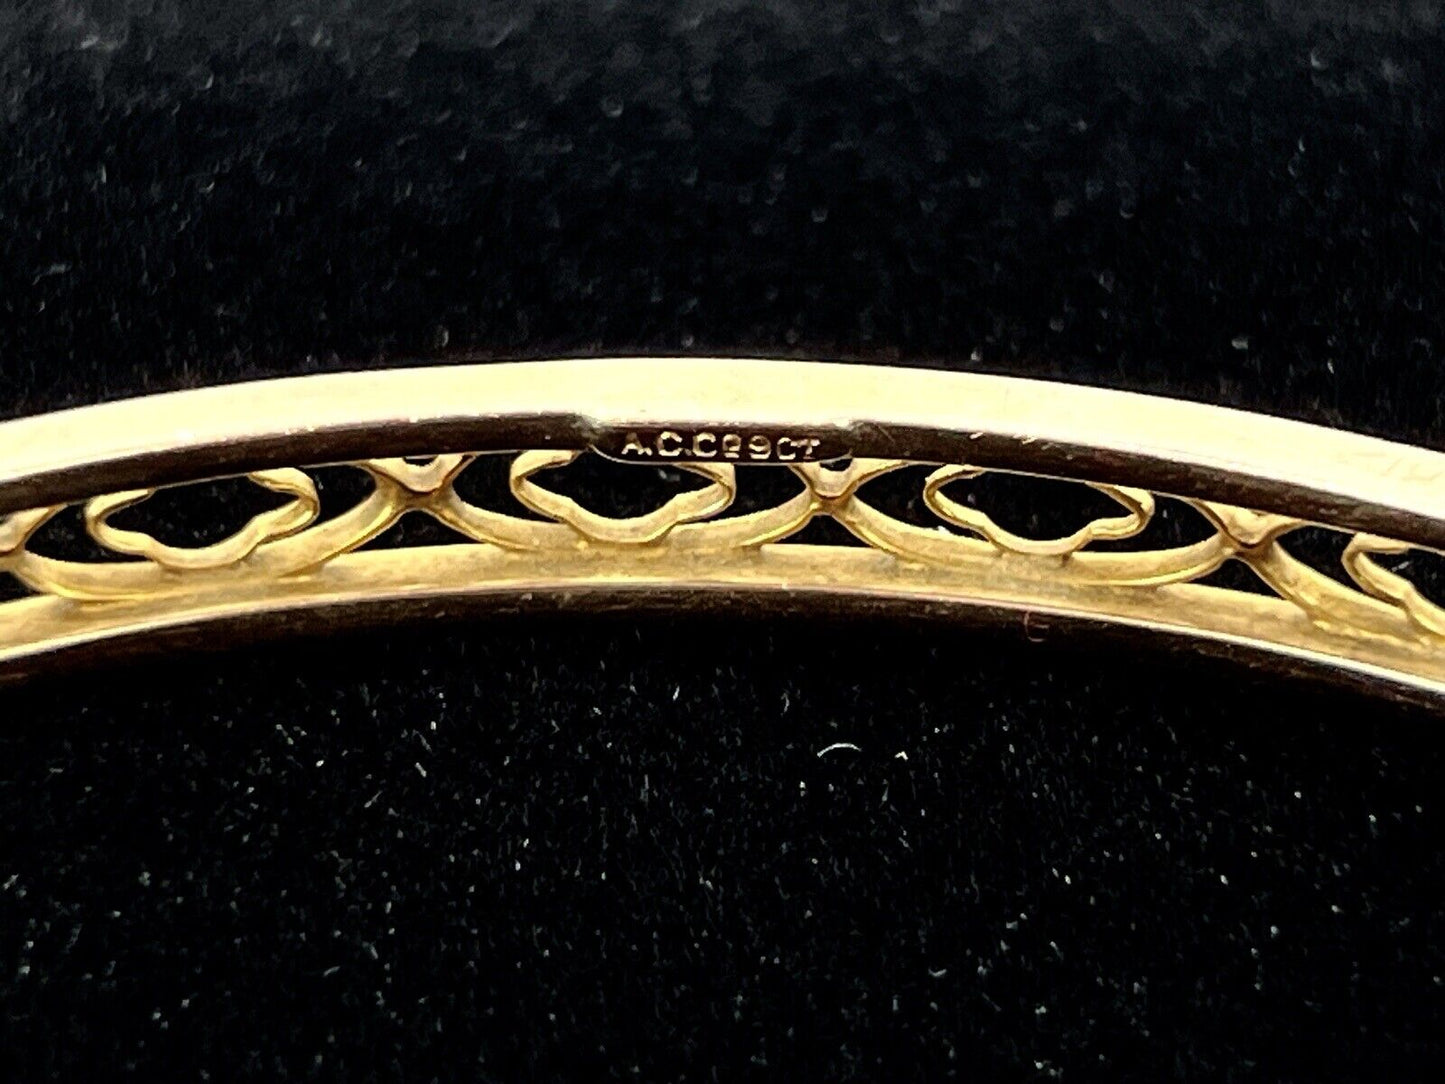 9ct Yellow Gold Slave Bracelet / Bangle, 10.0g and 82mm Diameter